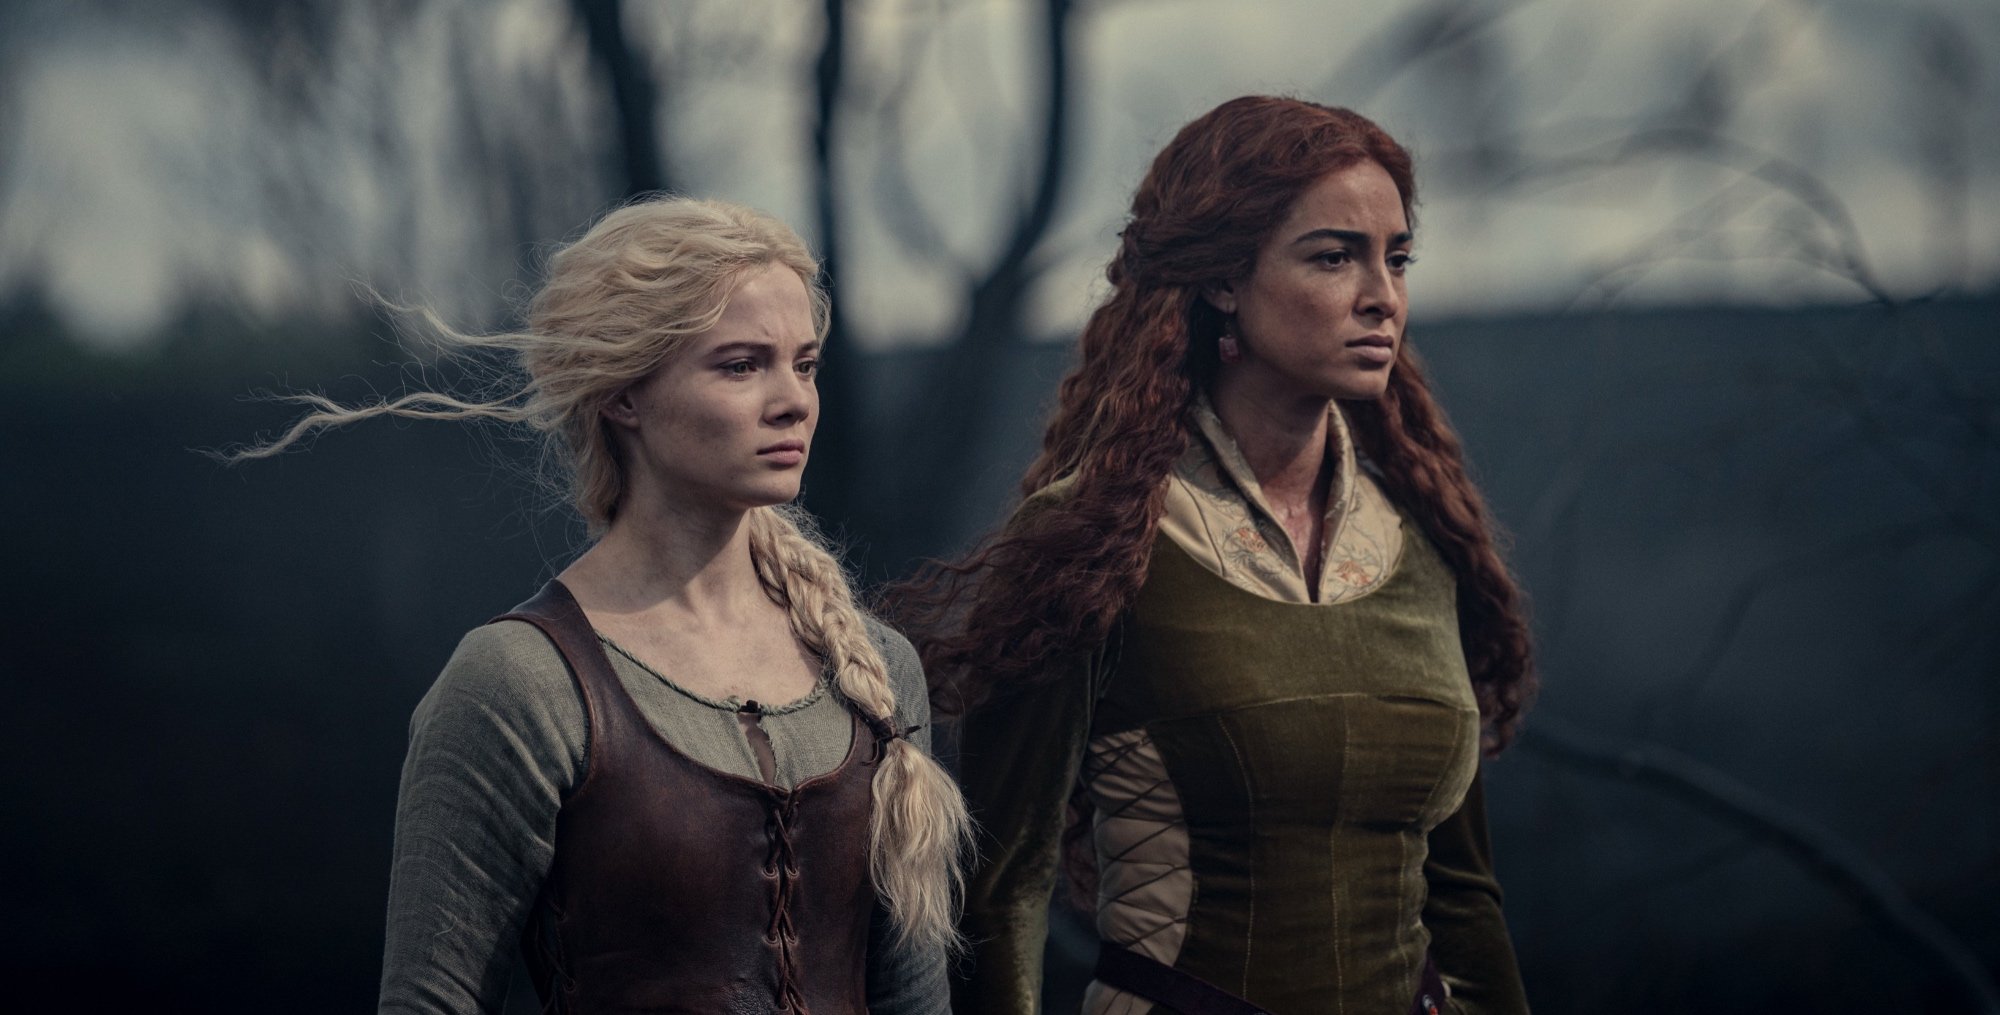 Ciri and Triss in 'The Witcher' Season 2 in the forest looking forward.